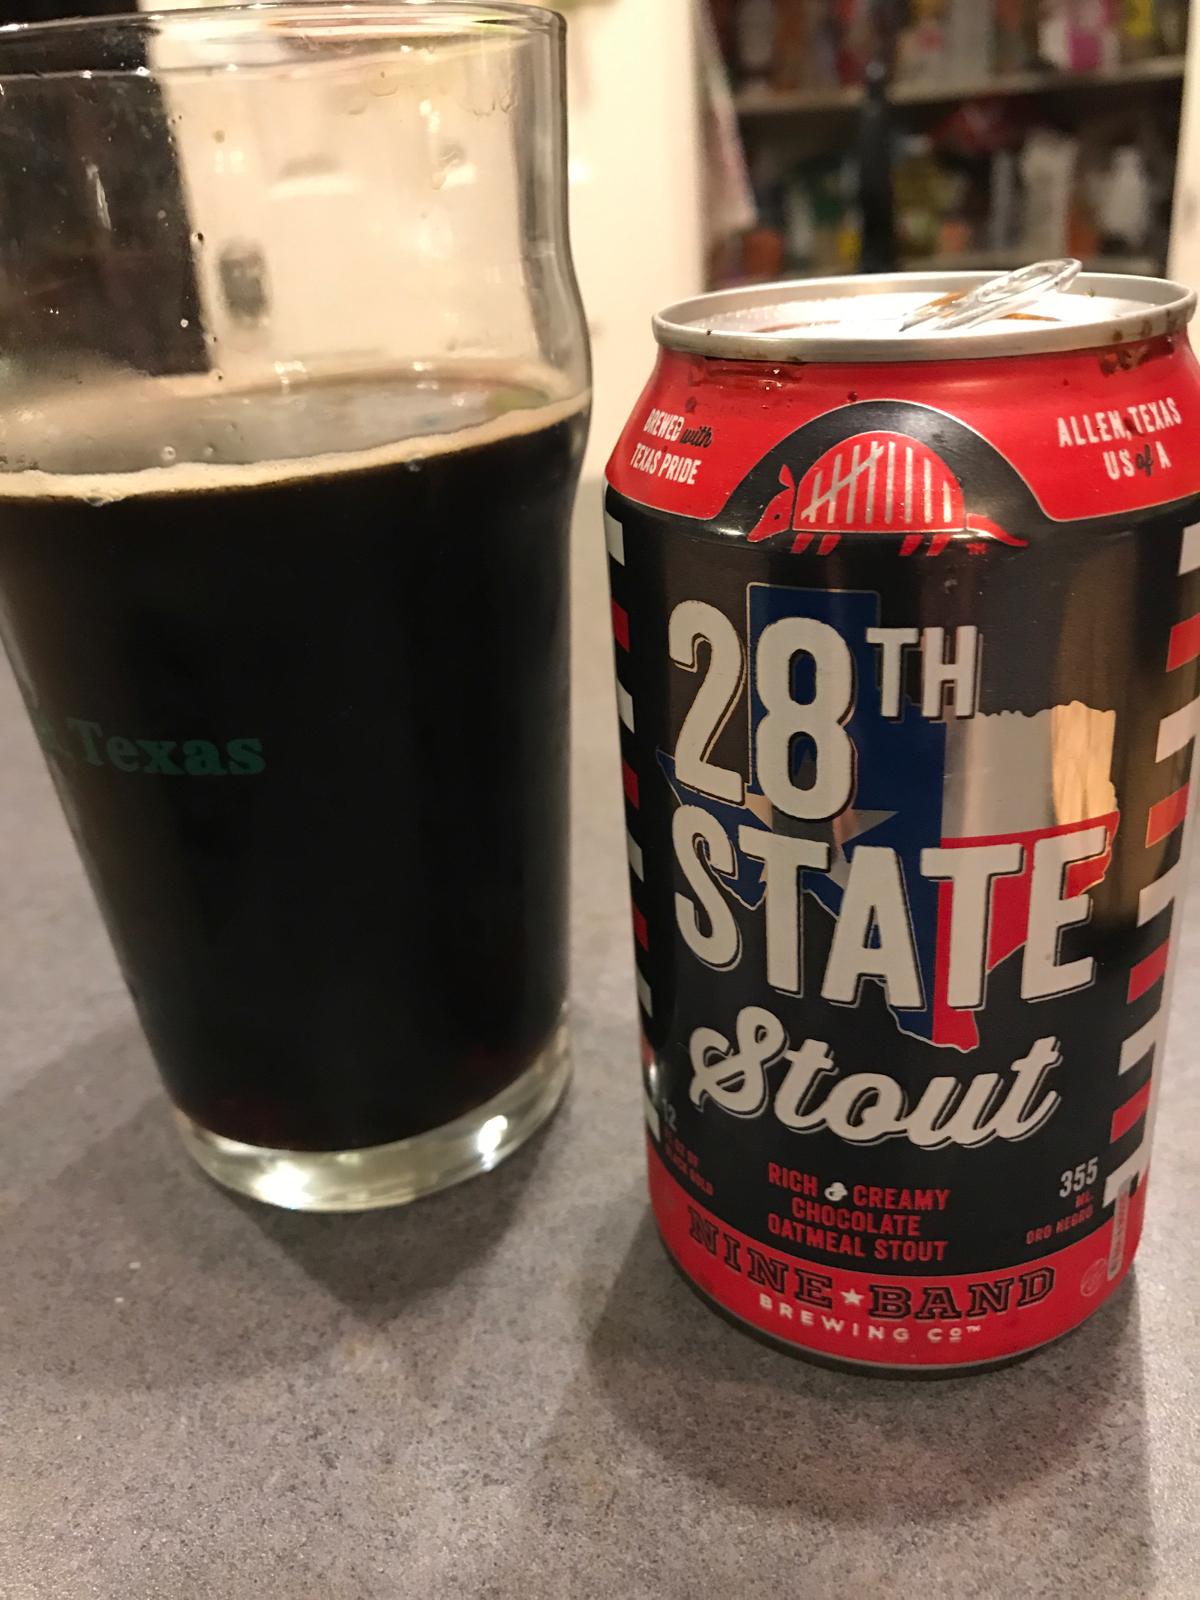 28th State Stout